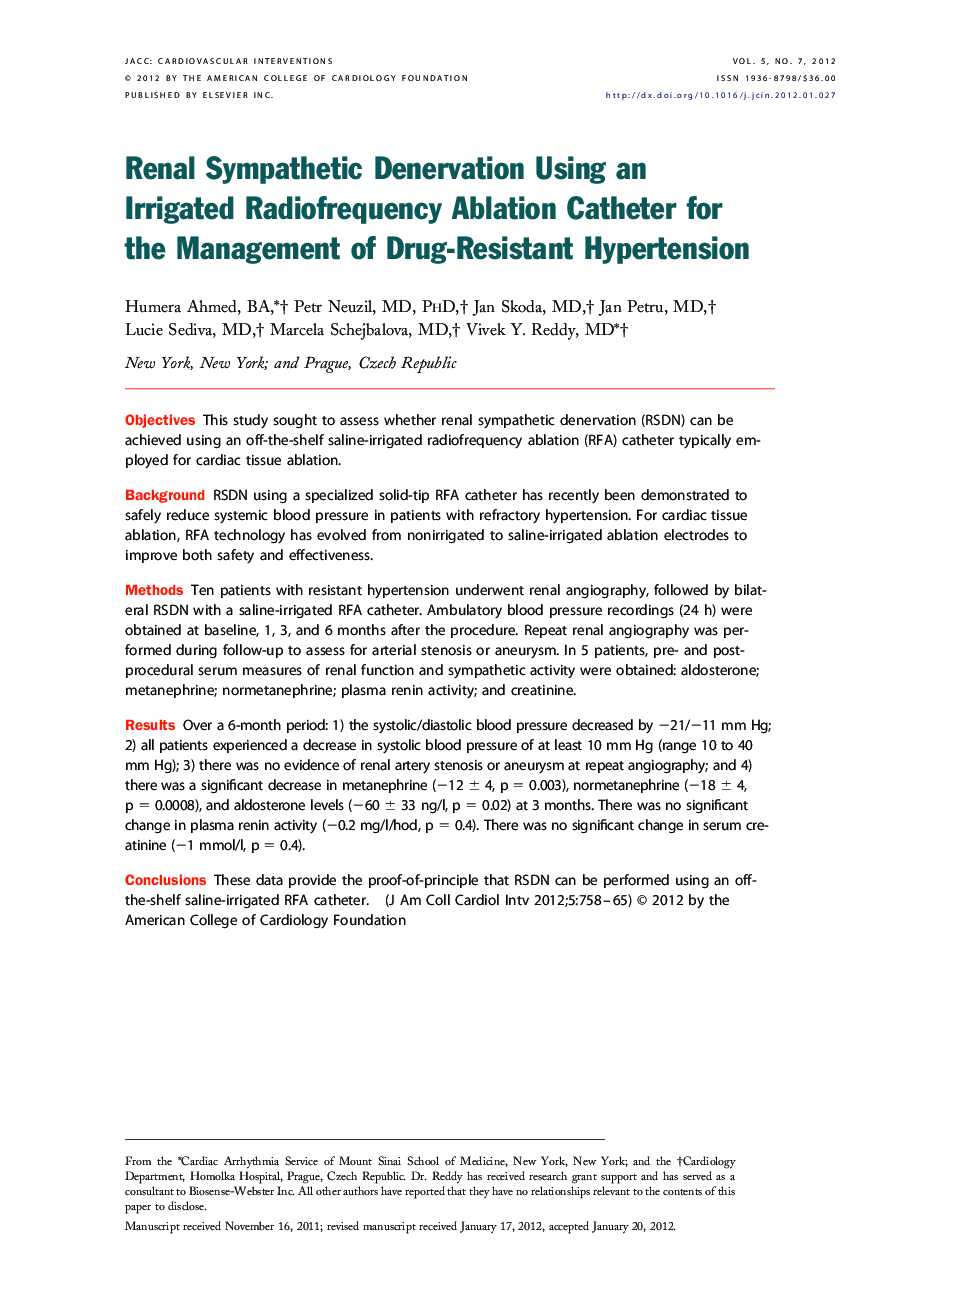 Renal Sympathetic Denervation Using an Irrigated Radiofrequency Ablation Catheter for the Management of Drug-Resistant Hypertension 